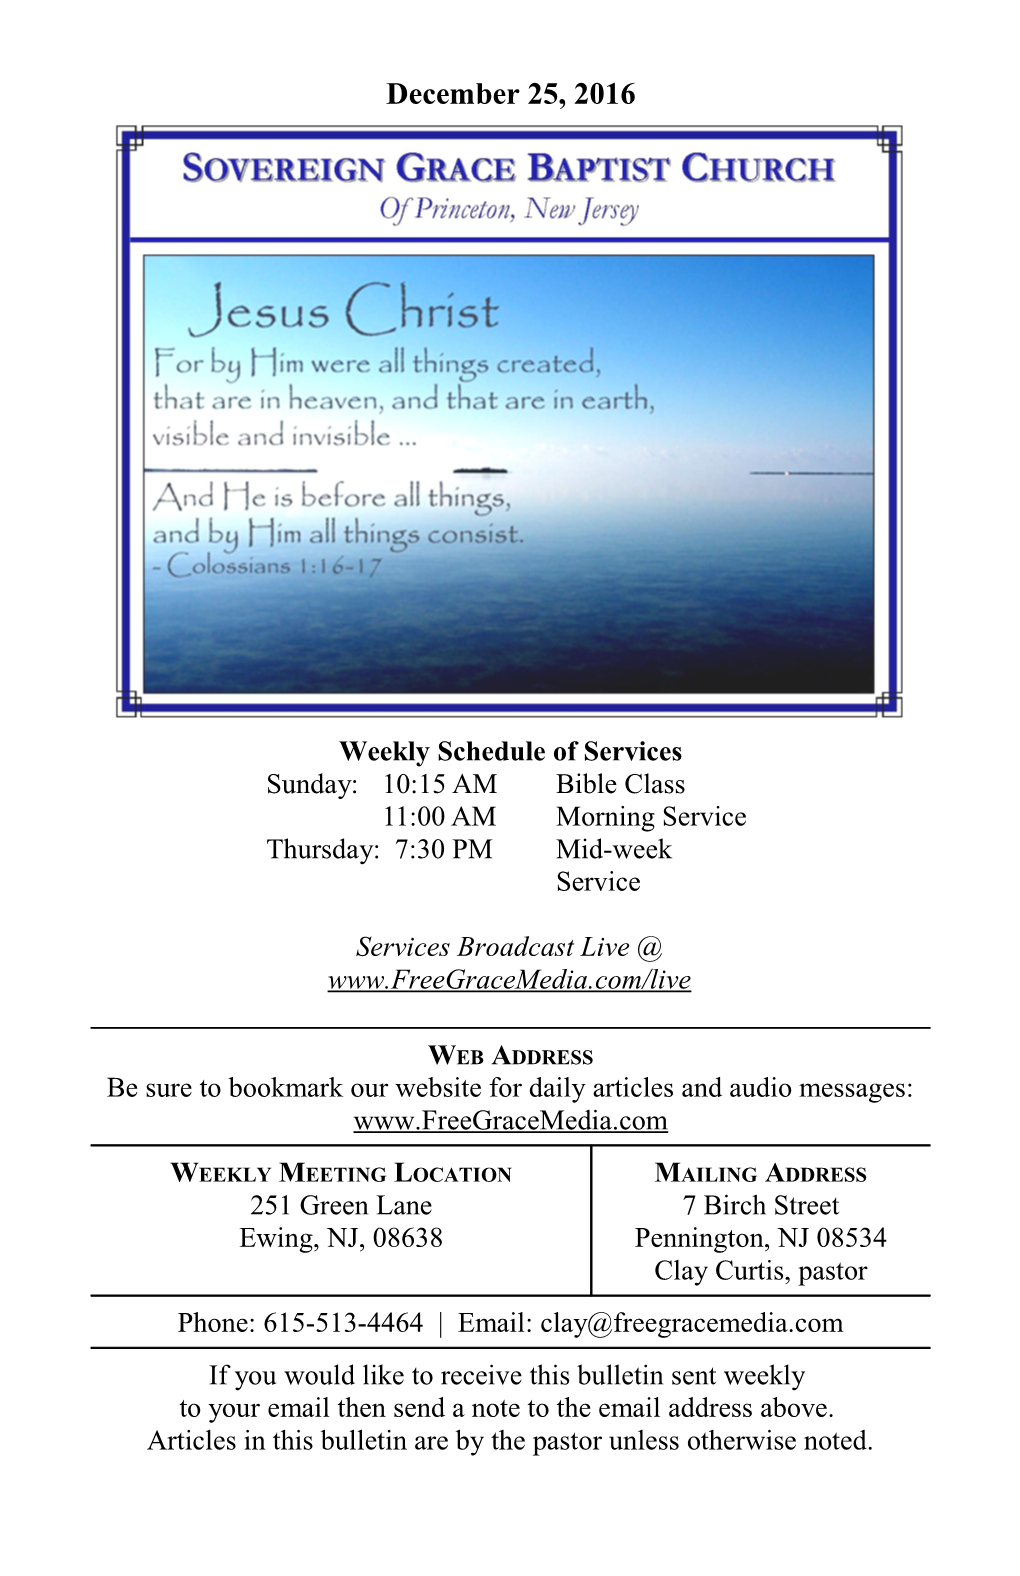 Weekly Schedule of Services